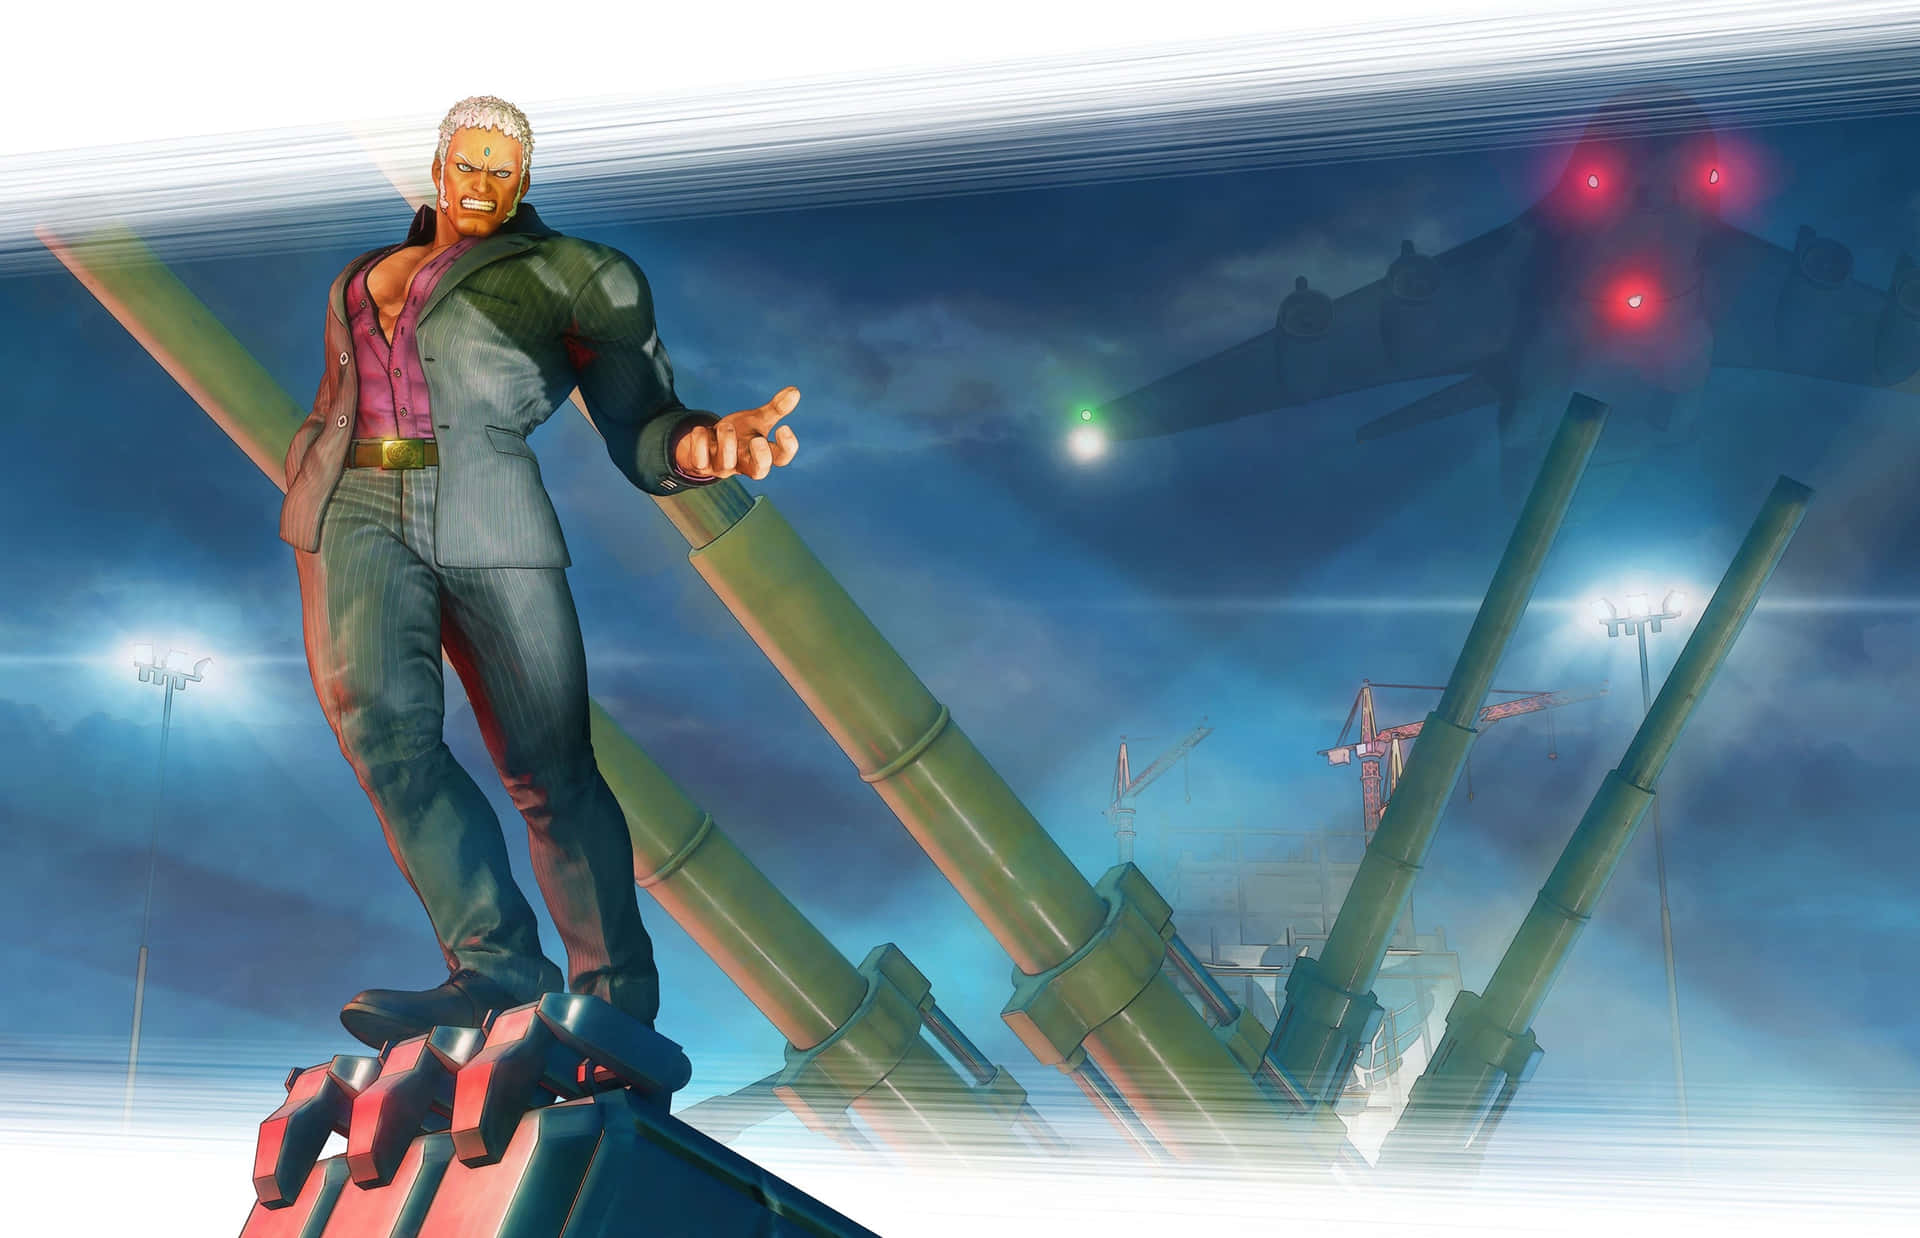 The classic fighting game Street Fighter VI takes to 4K Wallpaper